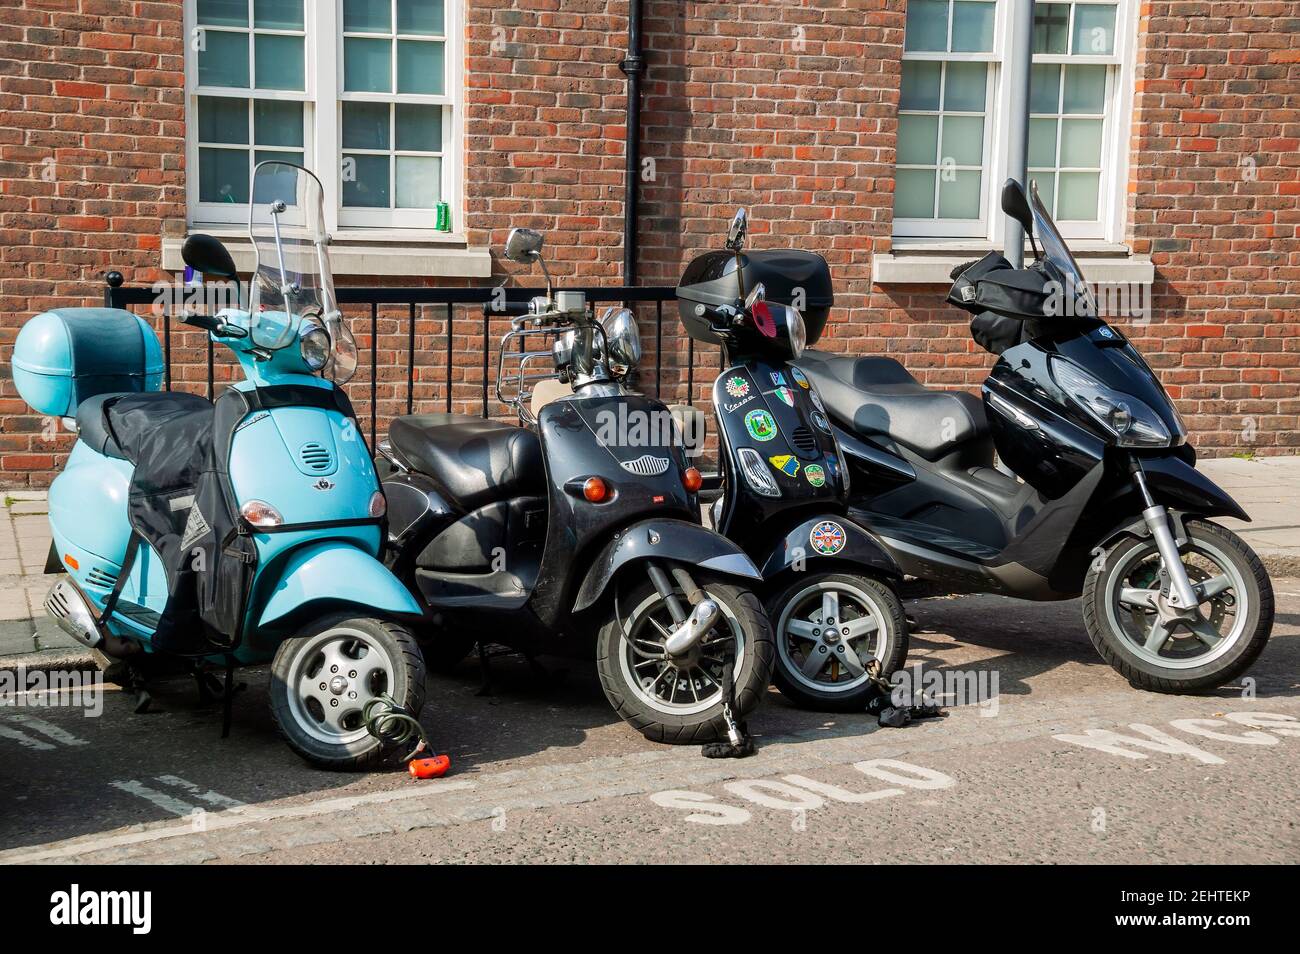 London, UK, March 21, 2009 : Vespa moped and scooters along with a motorbike parked in a solo parking bay in the city centre, stock photo image Stock Photo